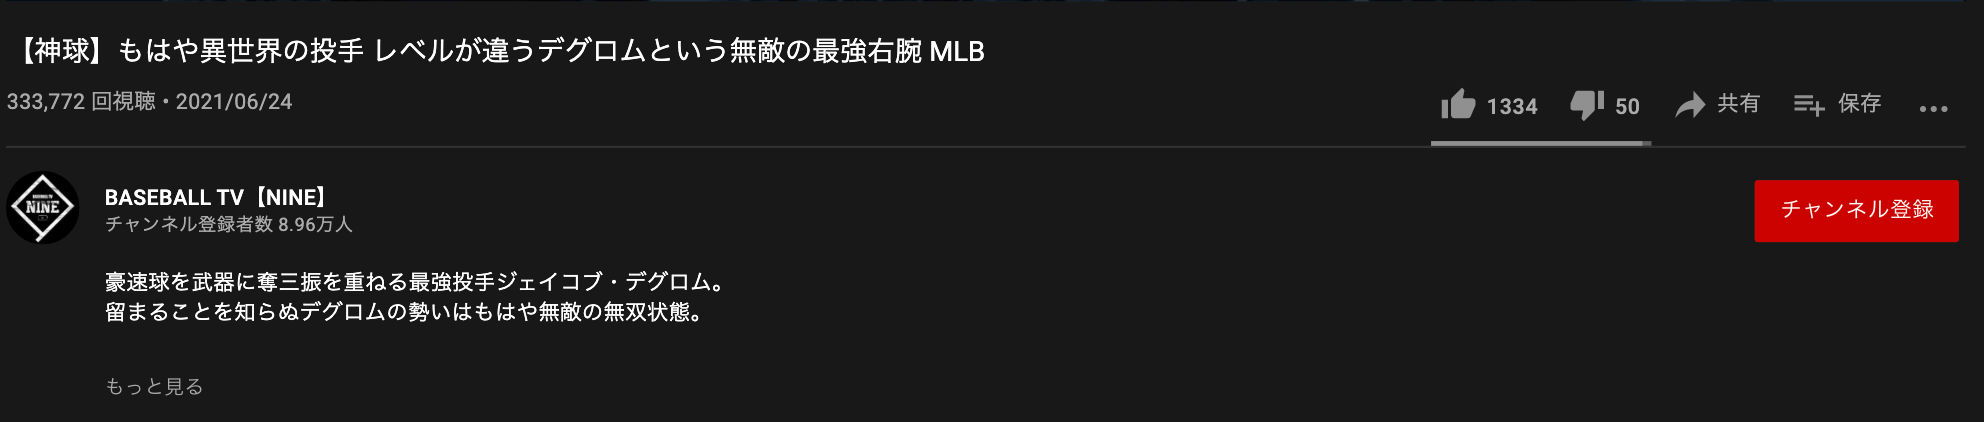 youtube-baseball player-content